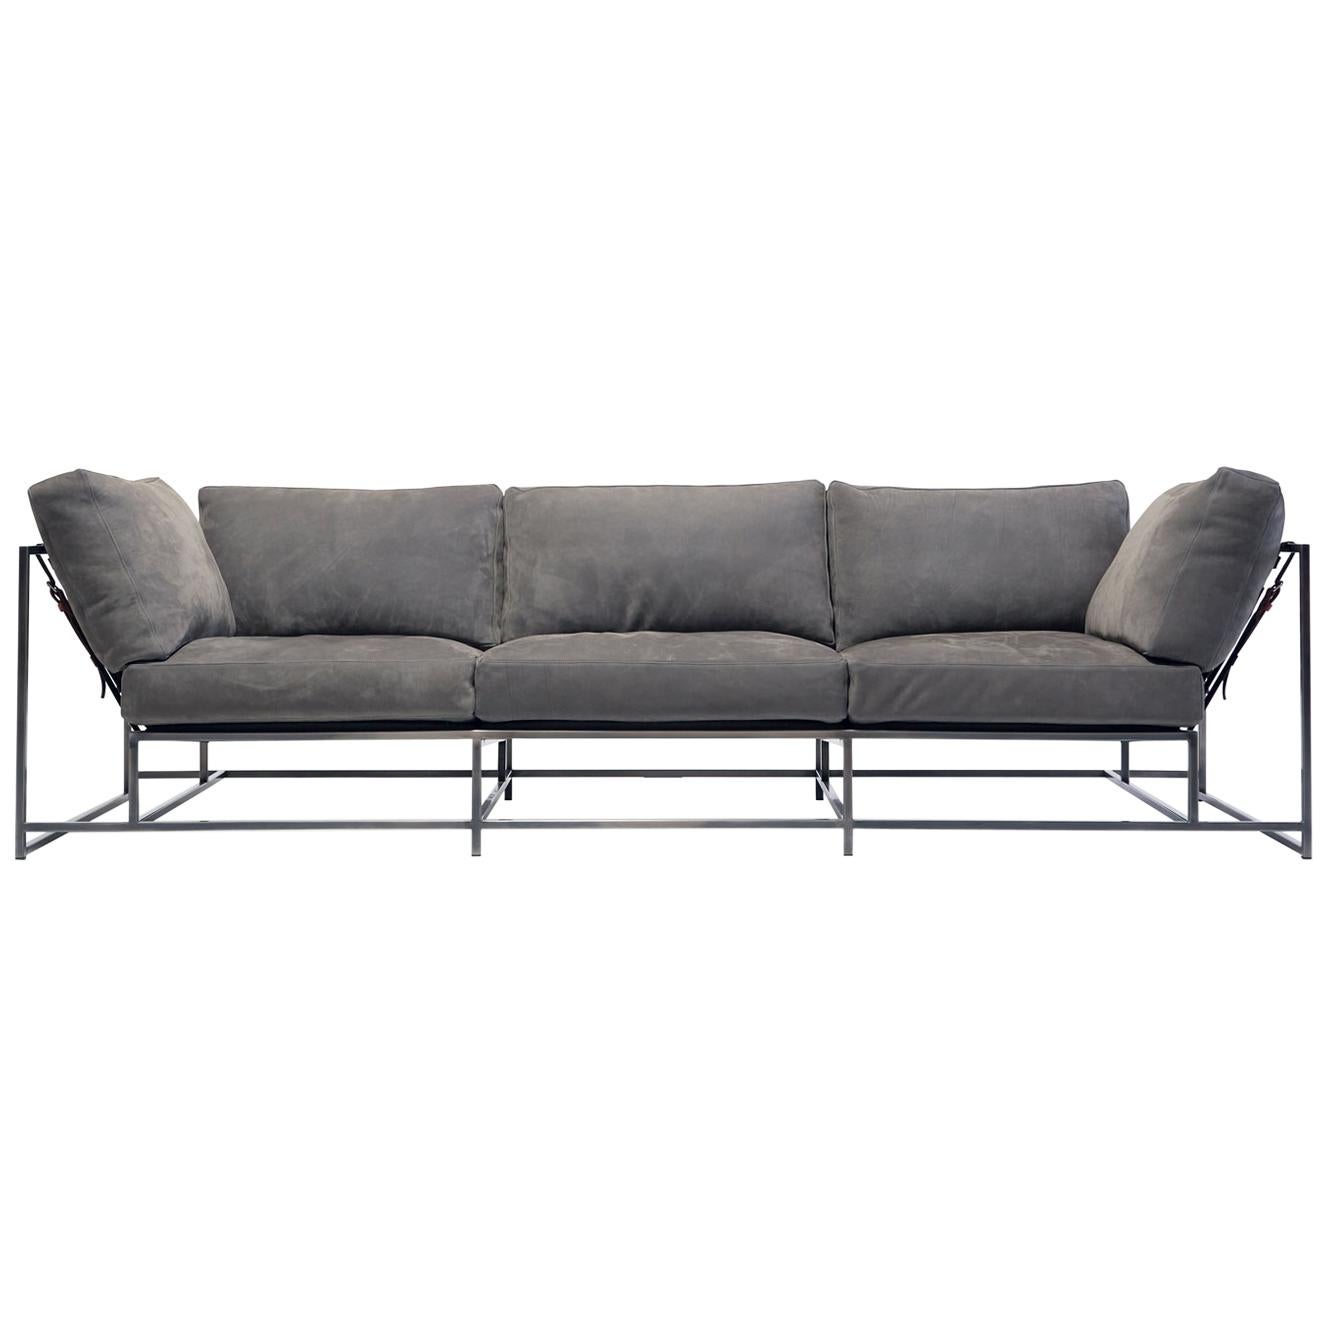 Grey Nubuck Leather and Antique Nickel Sofa For Sale